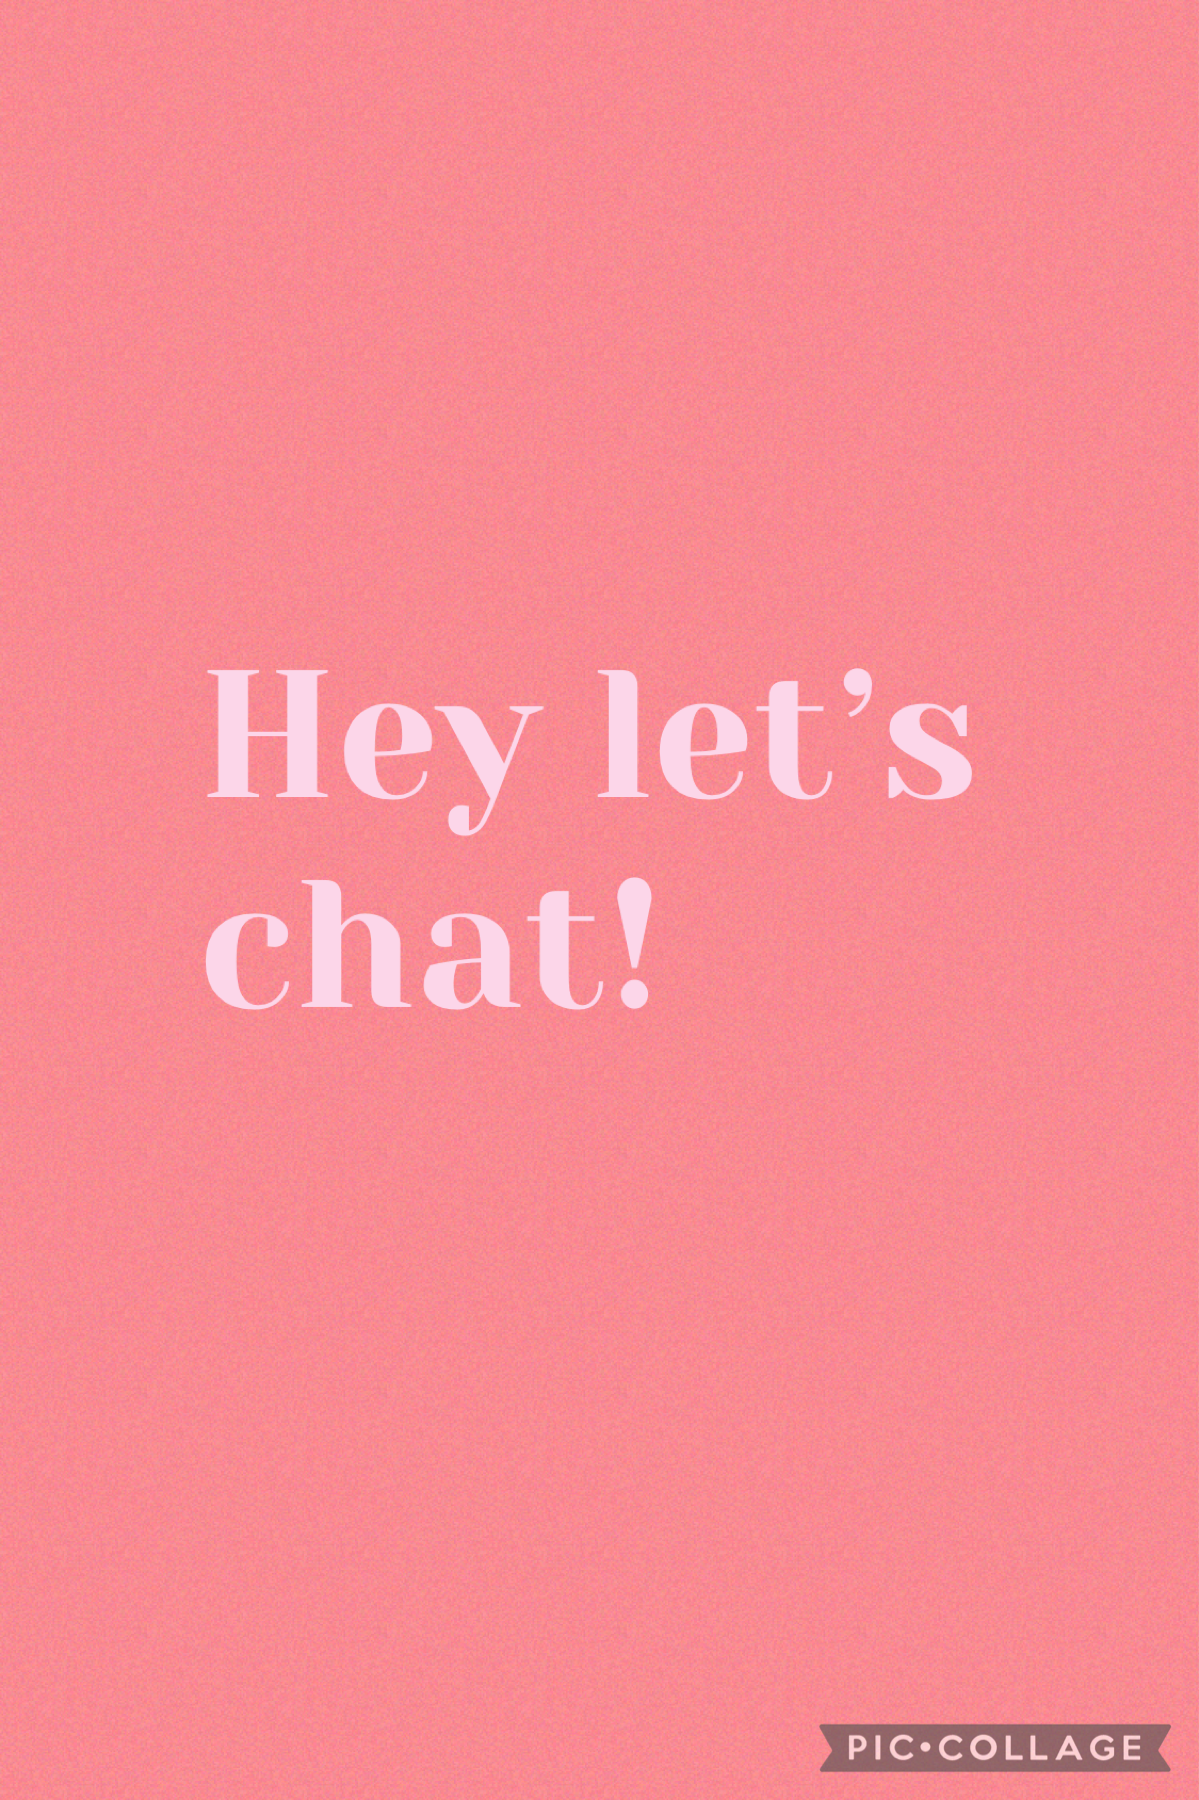 Hey let’s chat! 